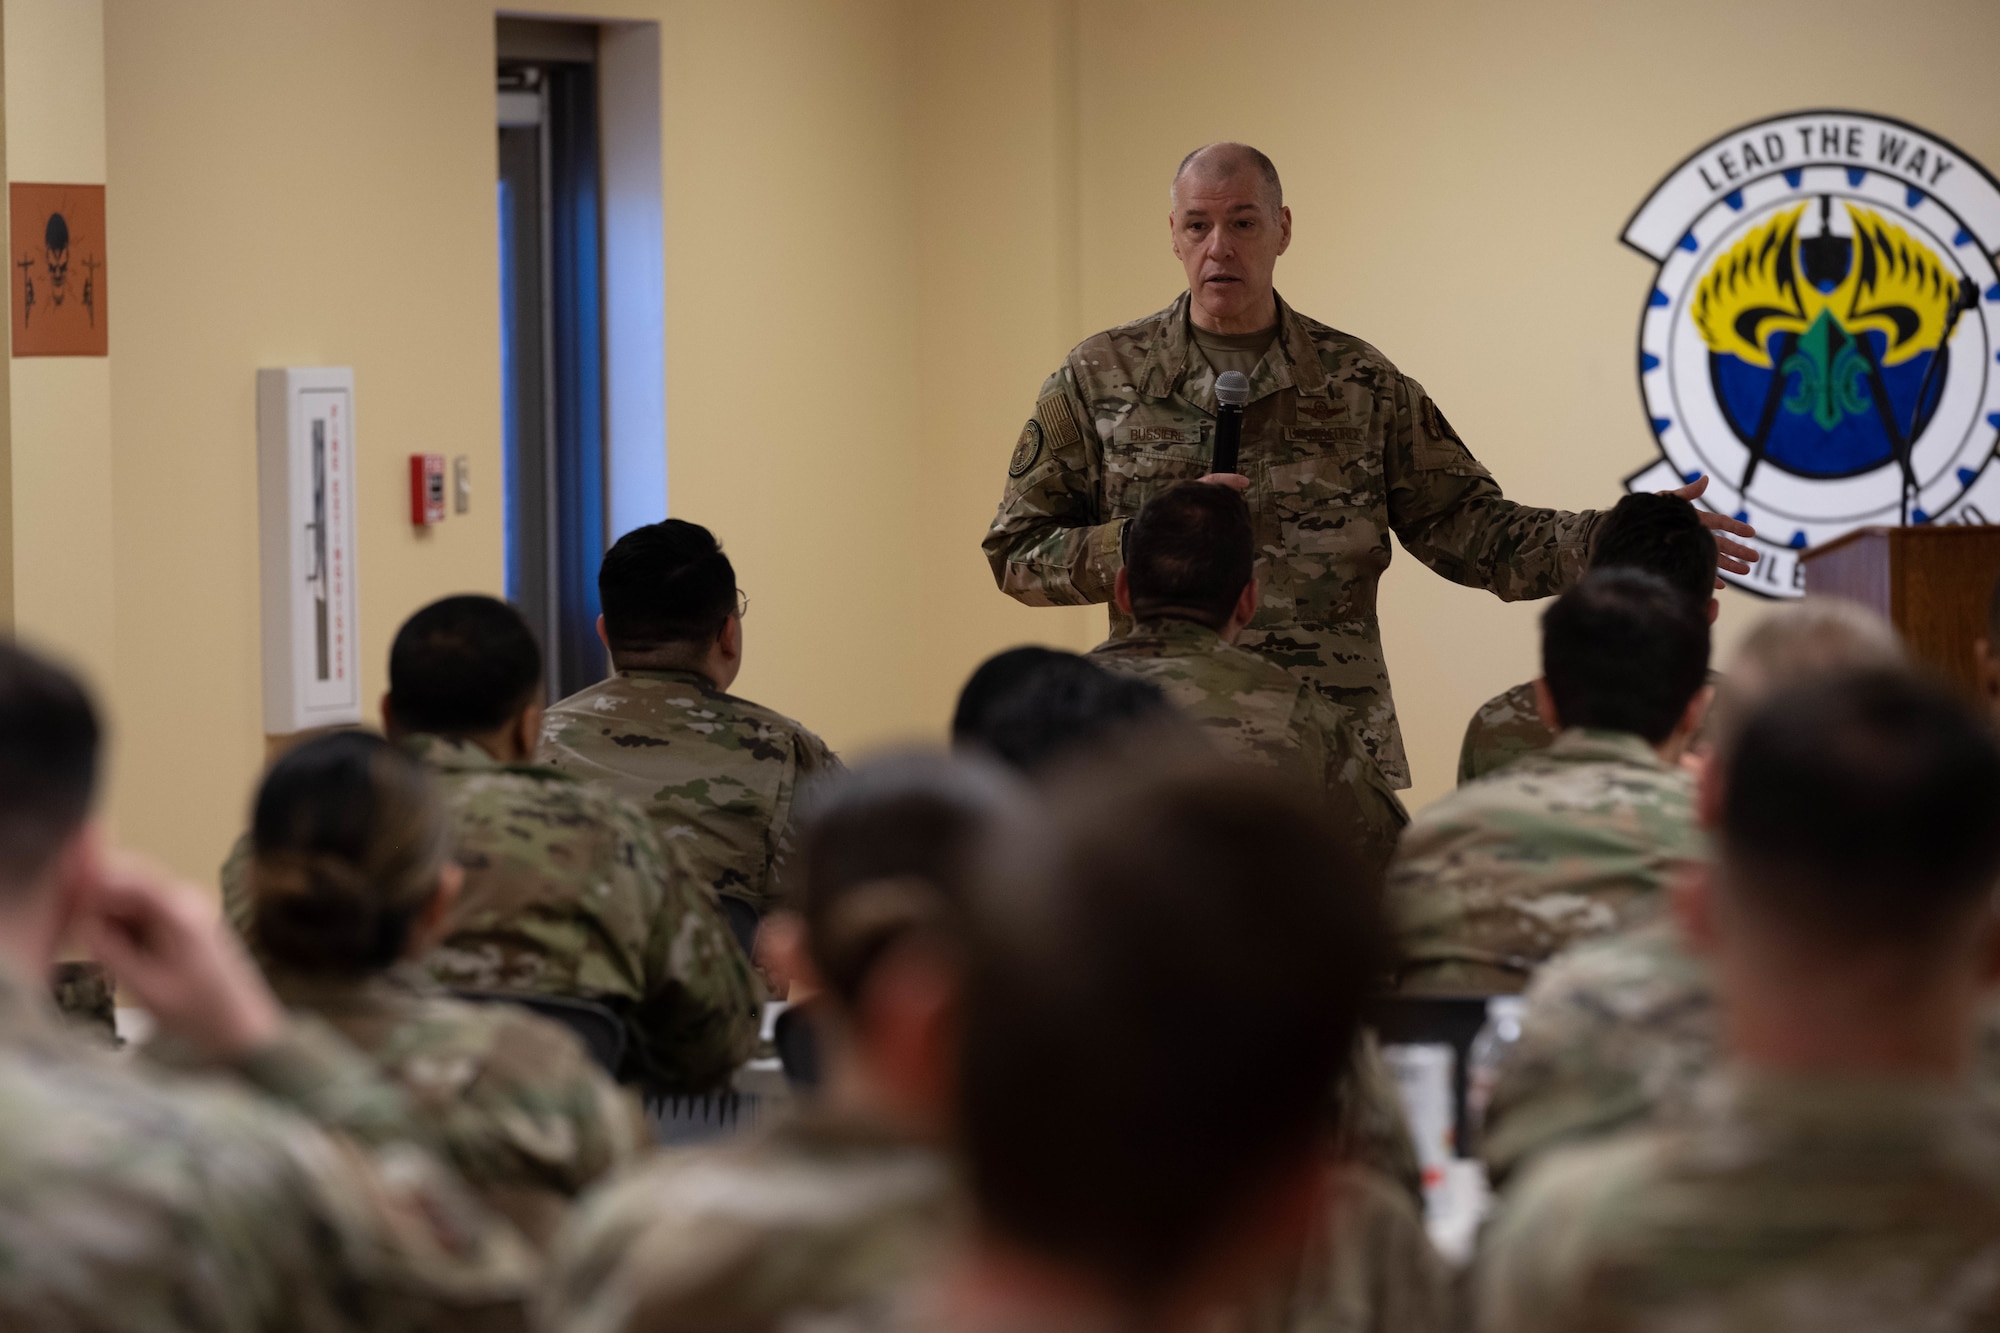 U.S. Air Force Gen. Thomas Bussiere, Air Force Global Strike Command (AFGSC) commander, discusses mission topics and concerns with Airmen from across the 2nd Bomb Wing during a base tour, Barksdale Air Force Base, La., Jan. 27, 2023.